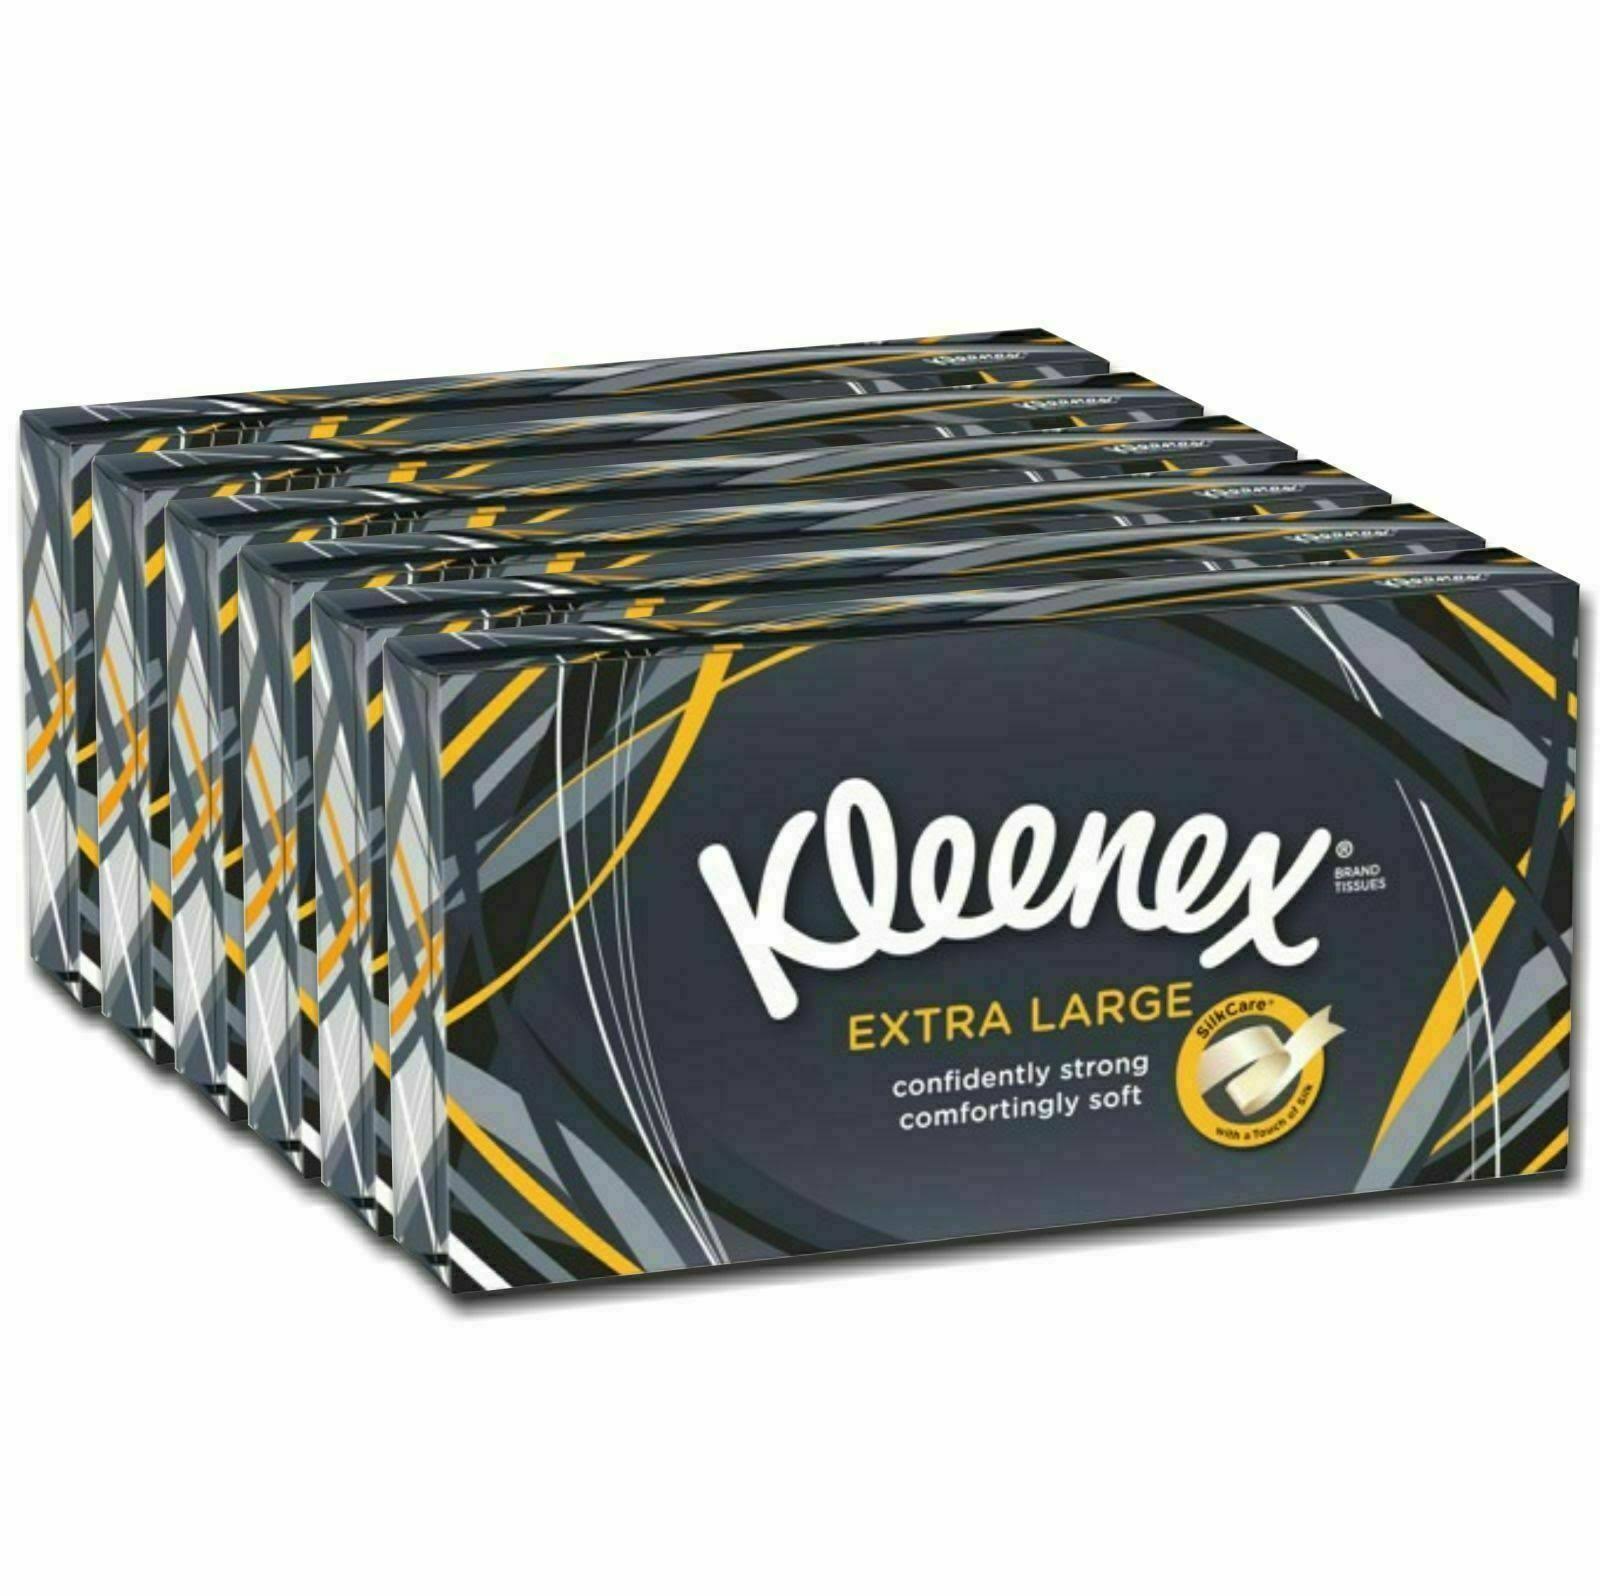 Kleenex Extra Large XL 2ply Facial Tissue Strong Soft 90 Sheets x 6 Pack Box